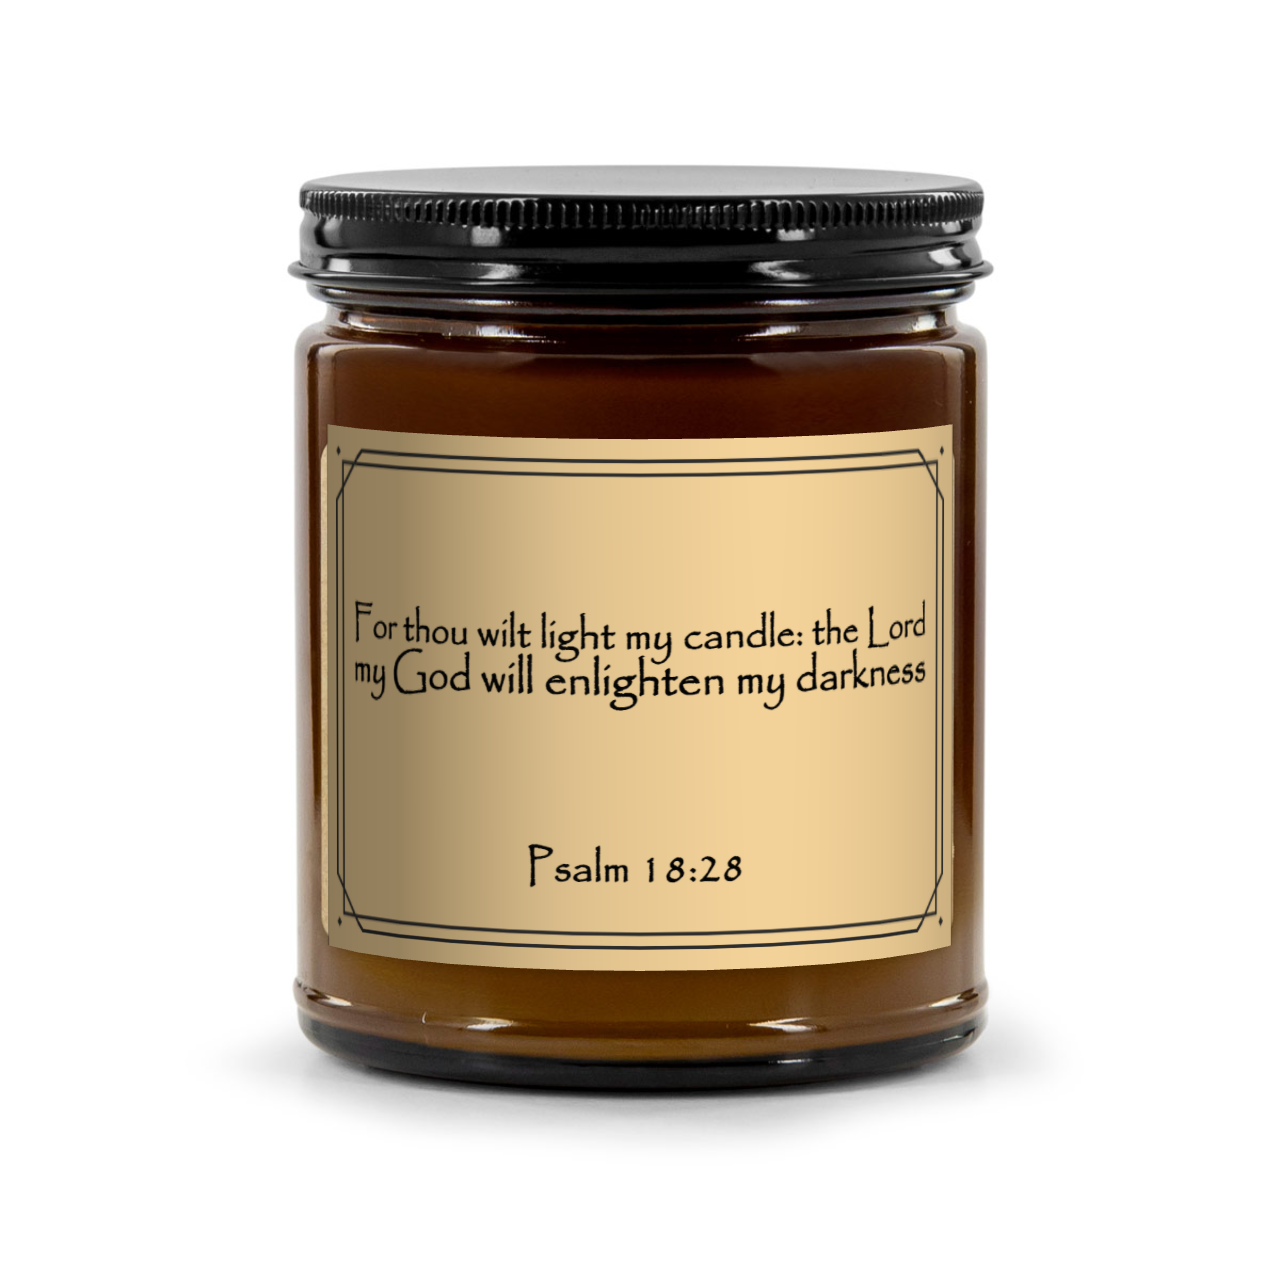 Psalm 18:28 Bible Scripture Scented Candle, In God's Service Store